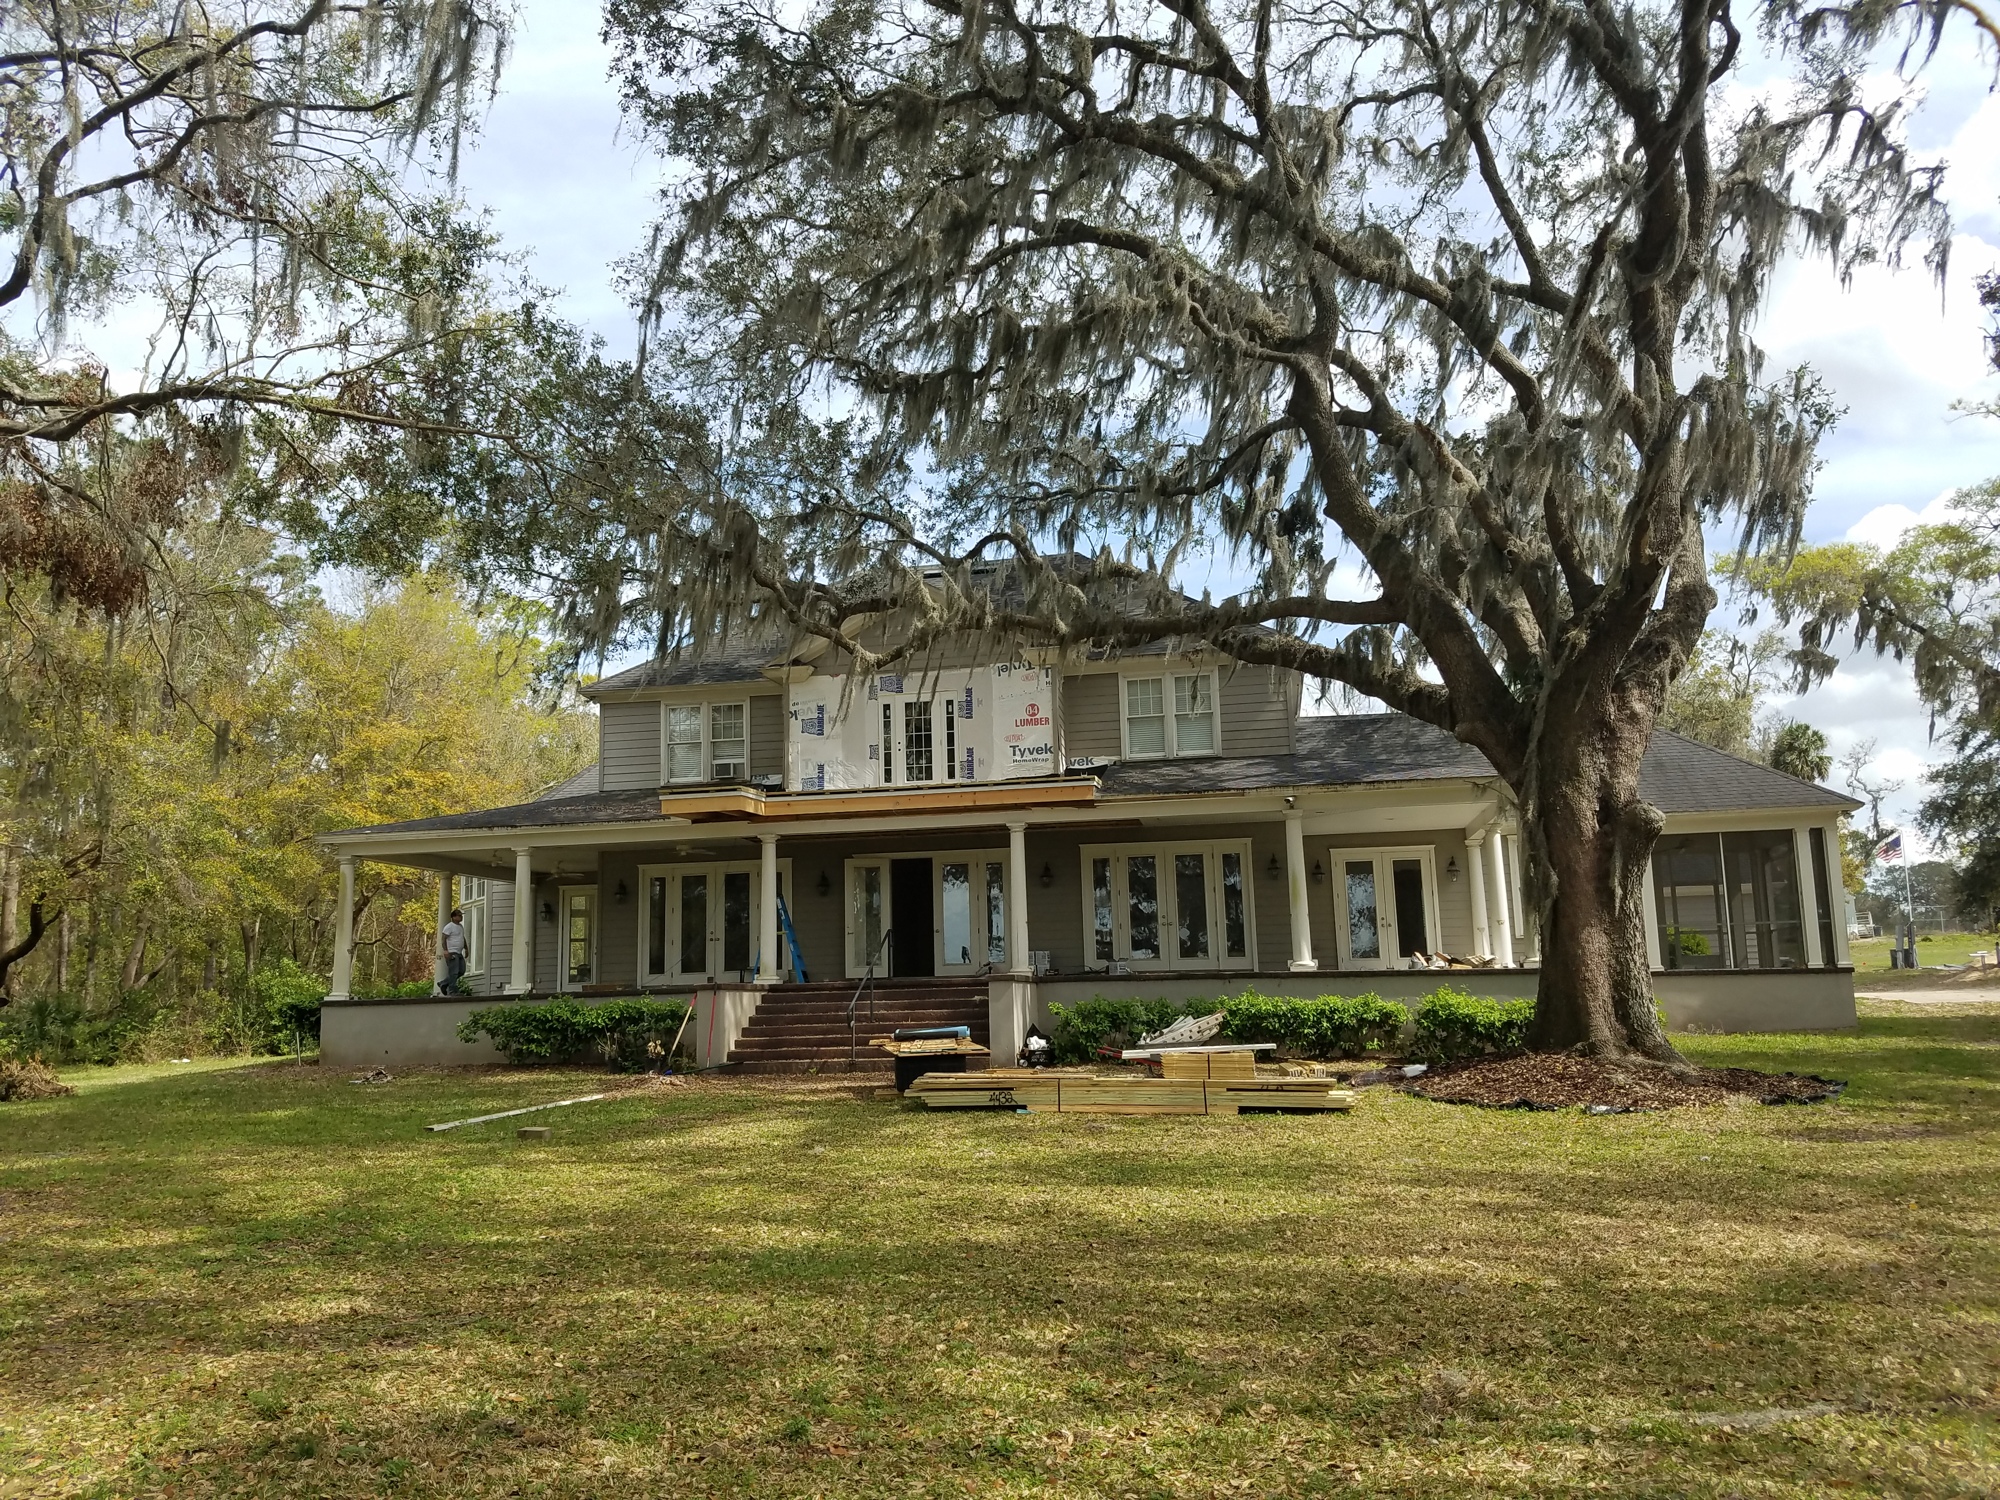 Just north of Dolphin Pointe Landing on the JU campus is the Alumni House, which is being renovated for a Department of Occupational Therapy doctoral program and an Occupational Therapy ADL Lab.